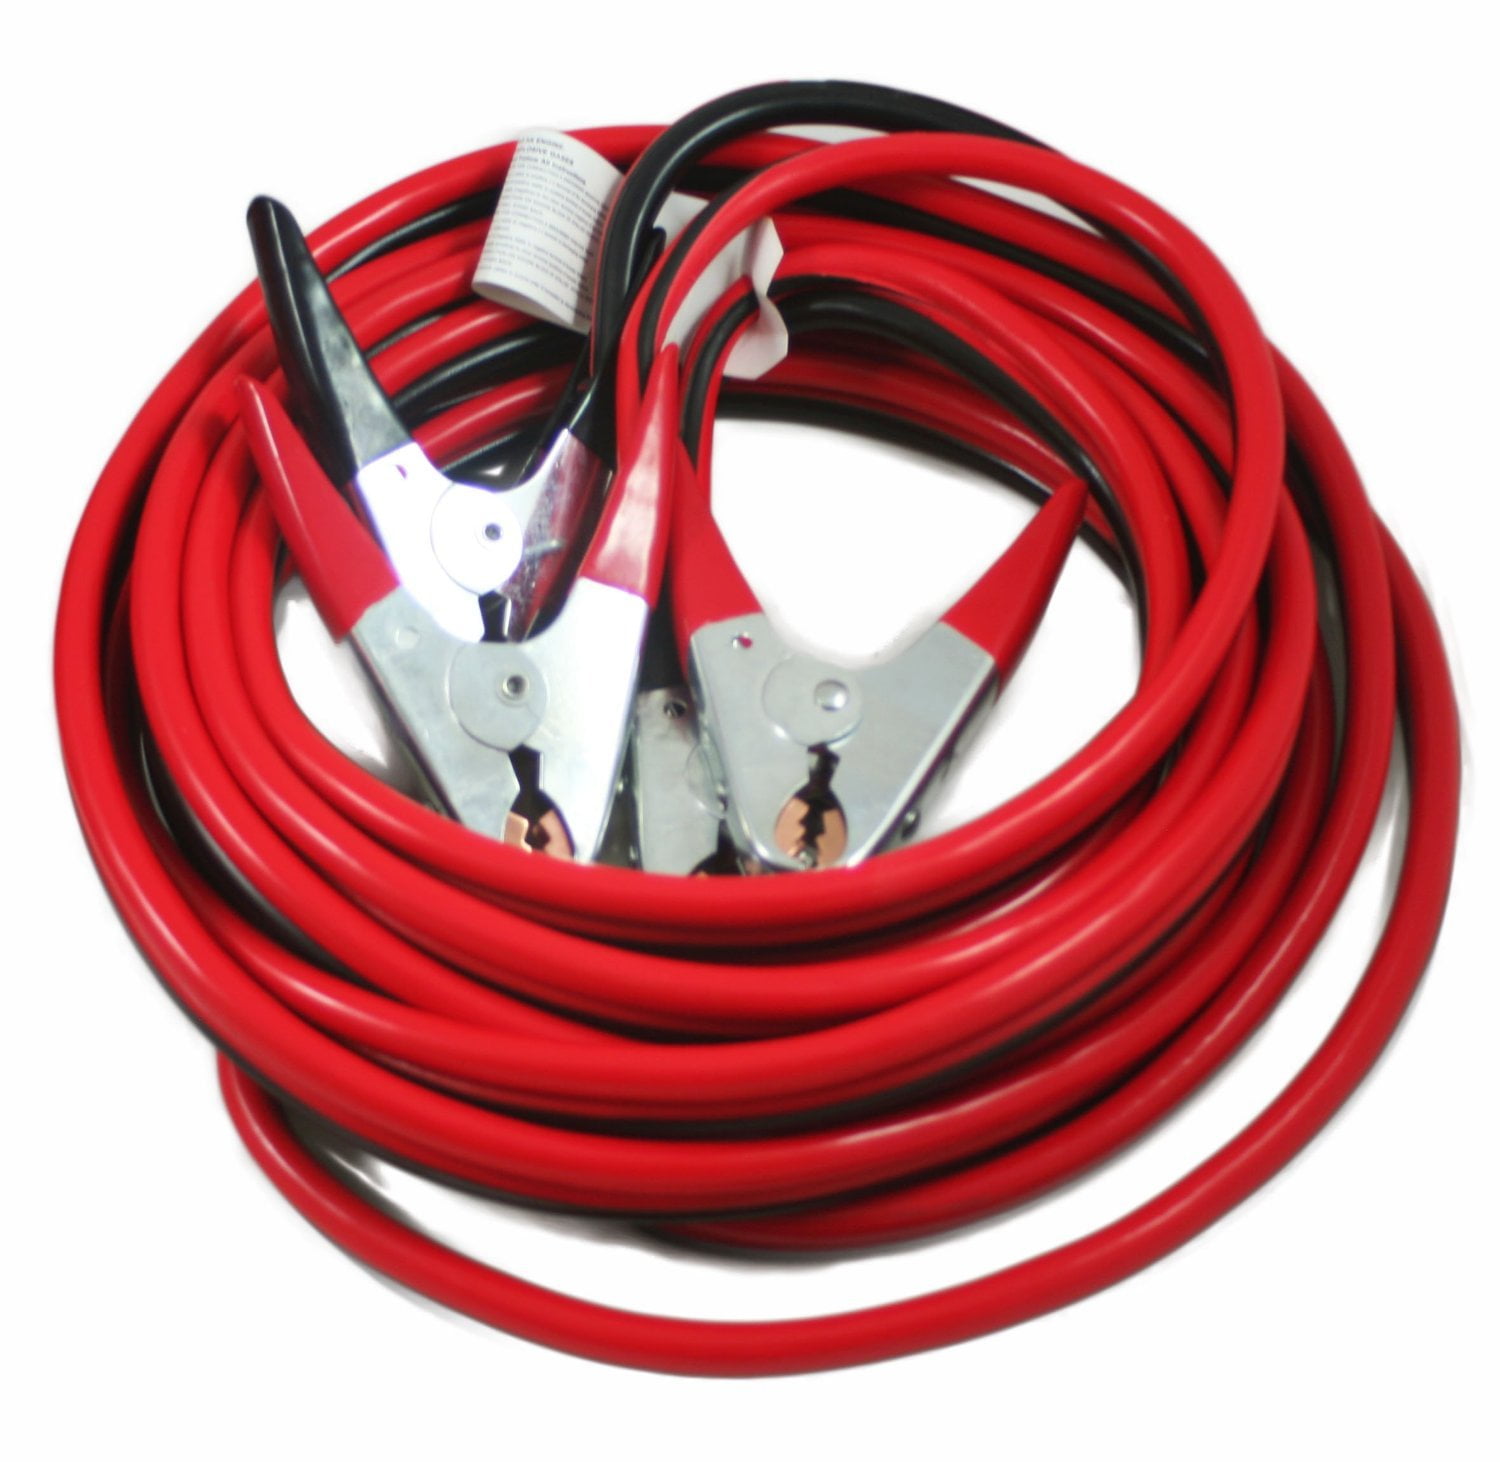 Heavy Duty Jumper Booster Cables Commercial Grade Battery 2 Gauge 600 AMP 10ft 